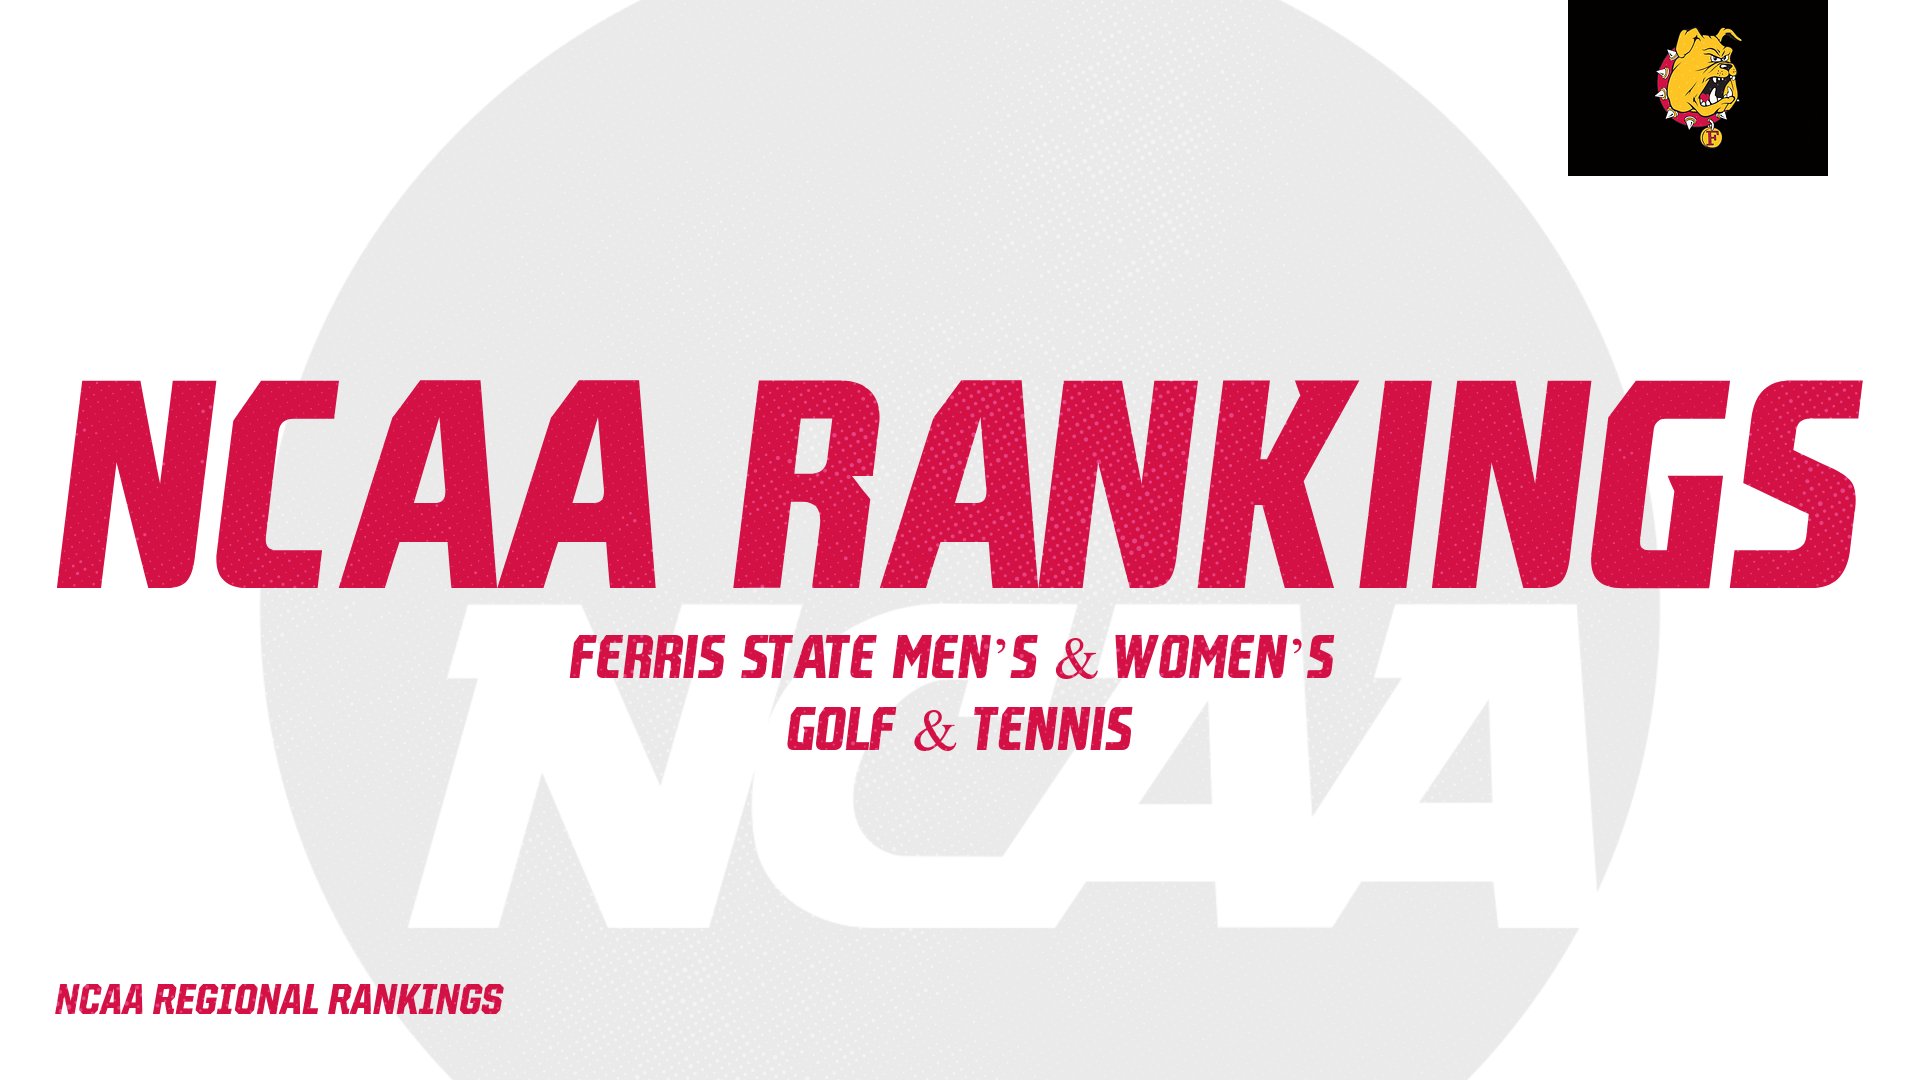 Ferris State Men's and Women's Golf and Tennis Teams All Featured In Latest NCAA Regional Rankings